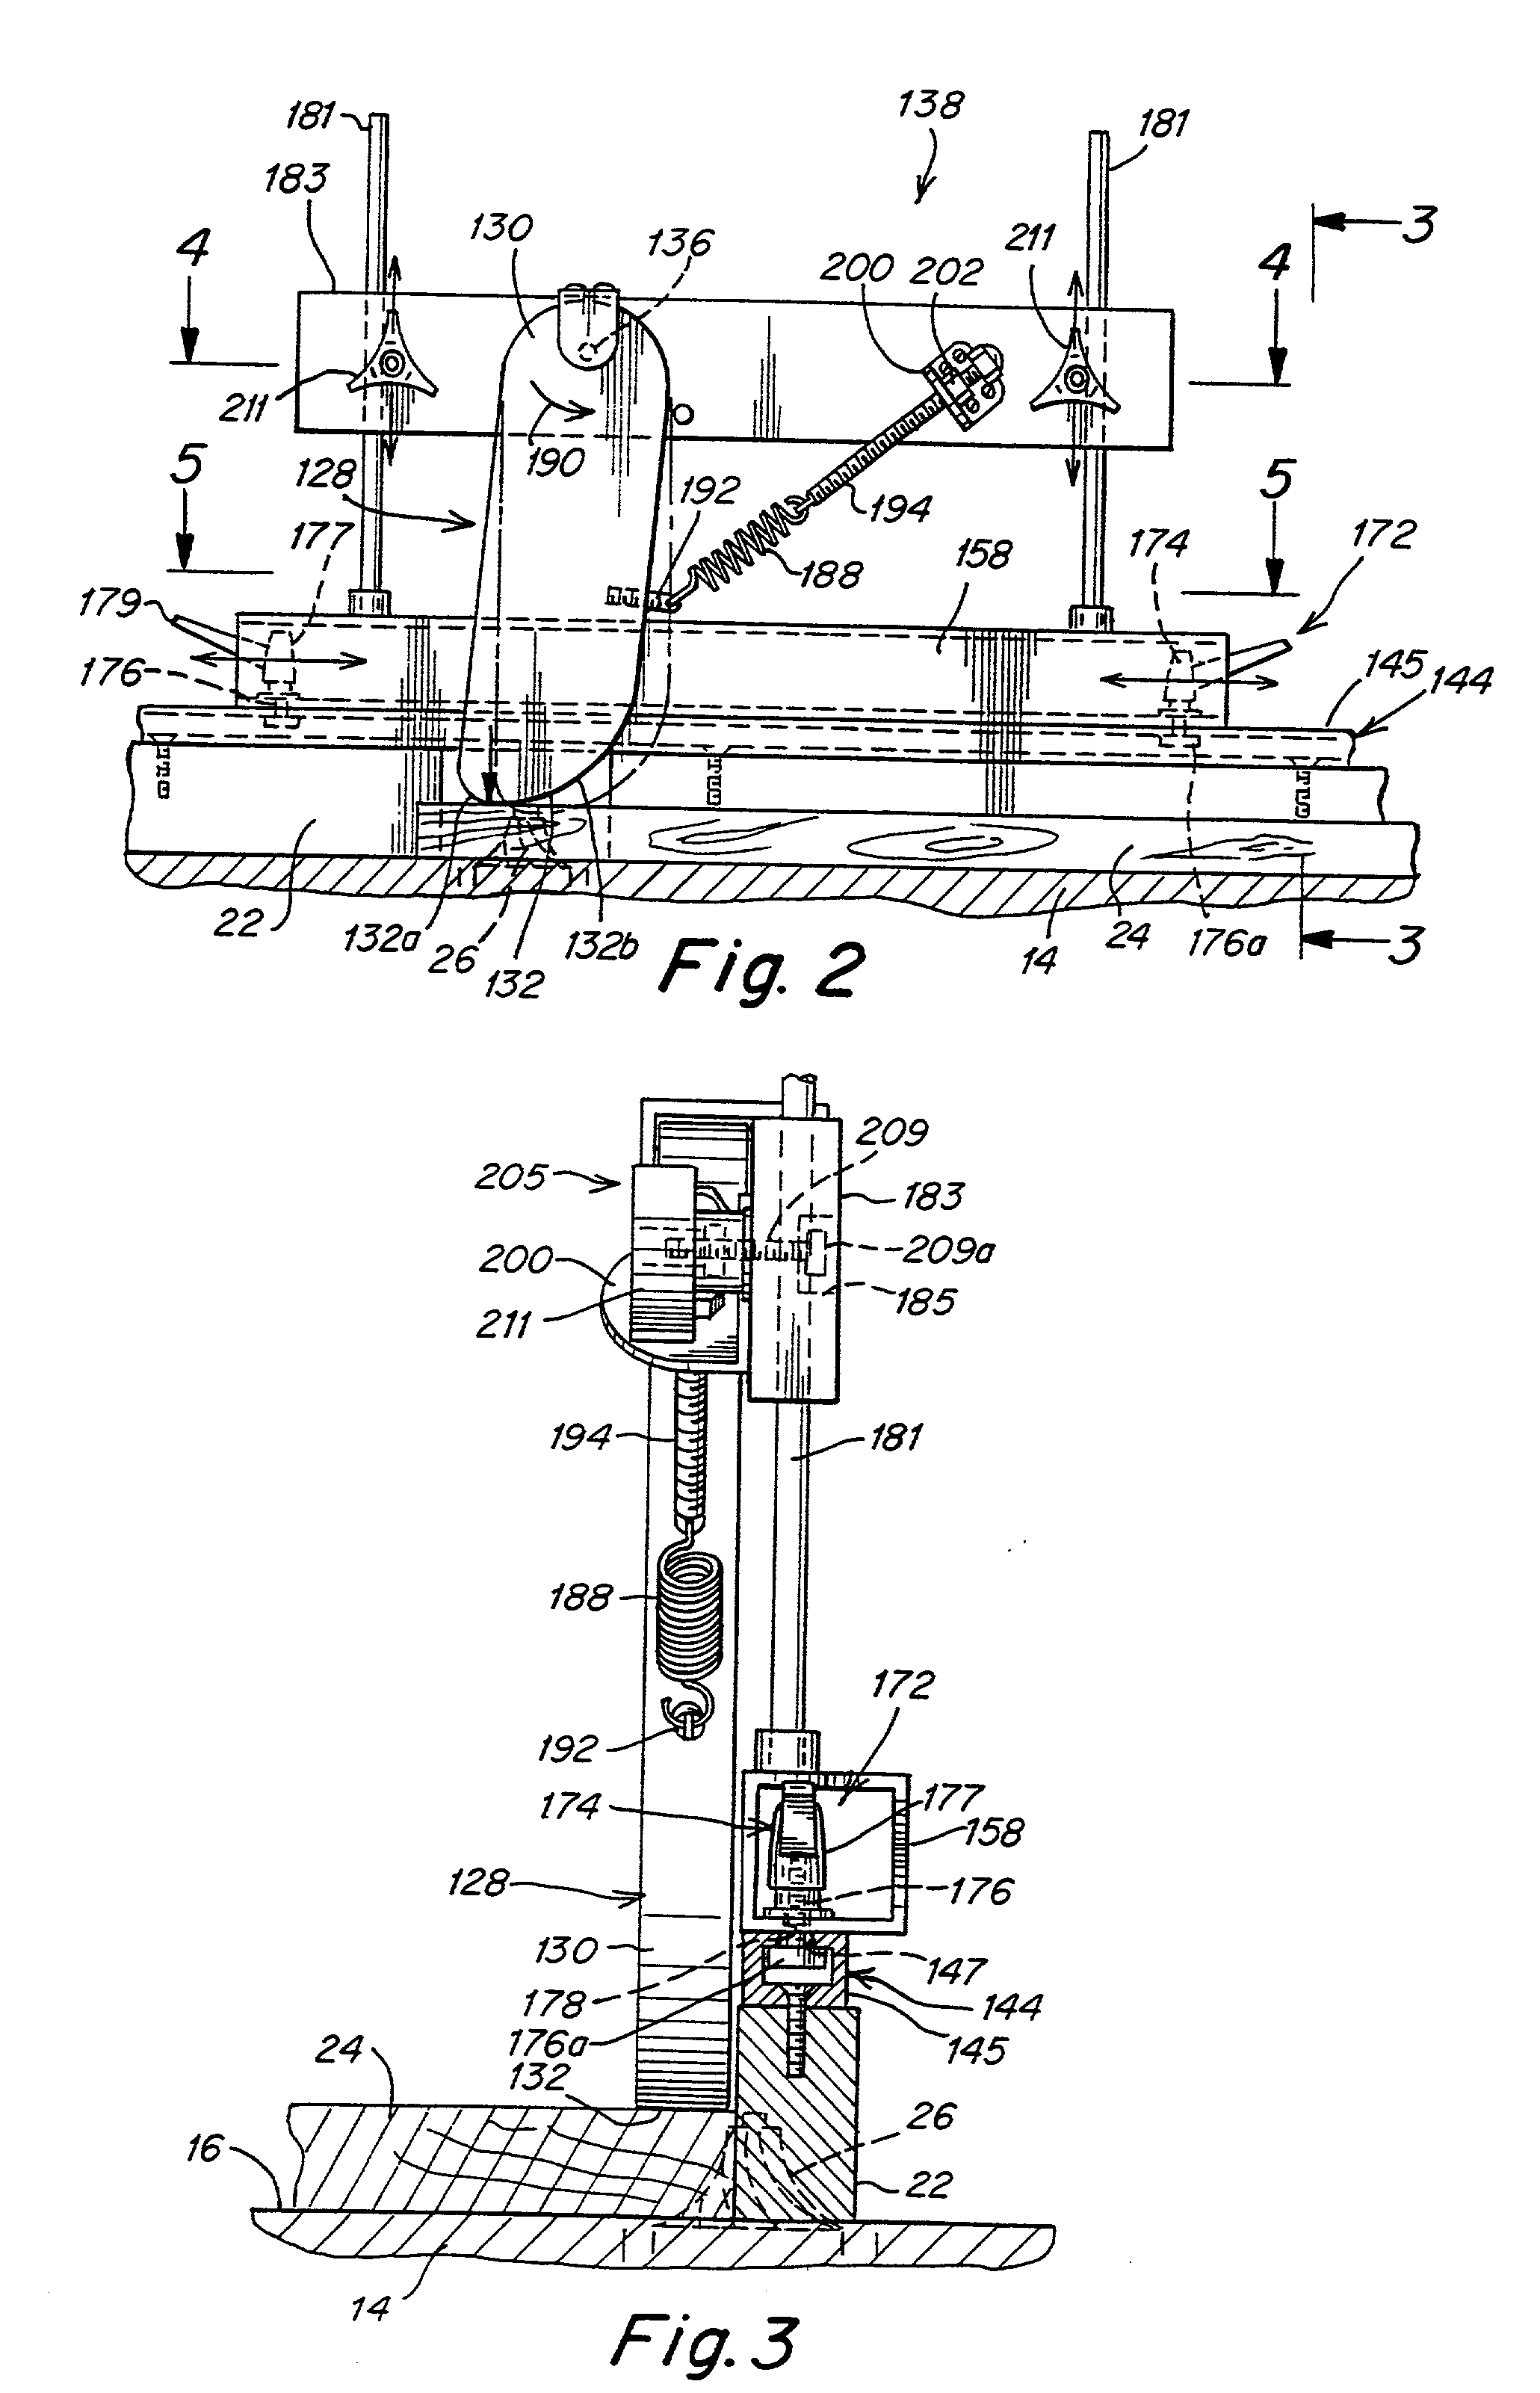 Combination workpiece positioning/hold-down and anti-kickback device for a work table